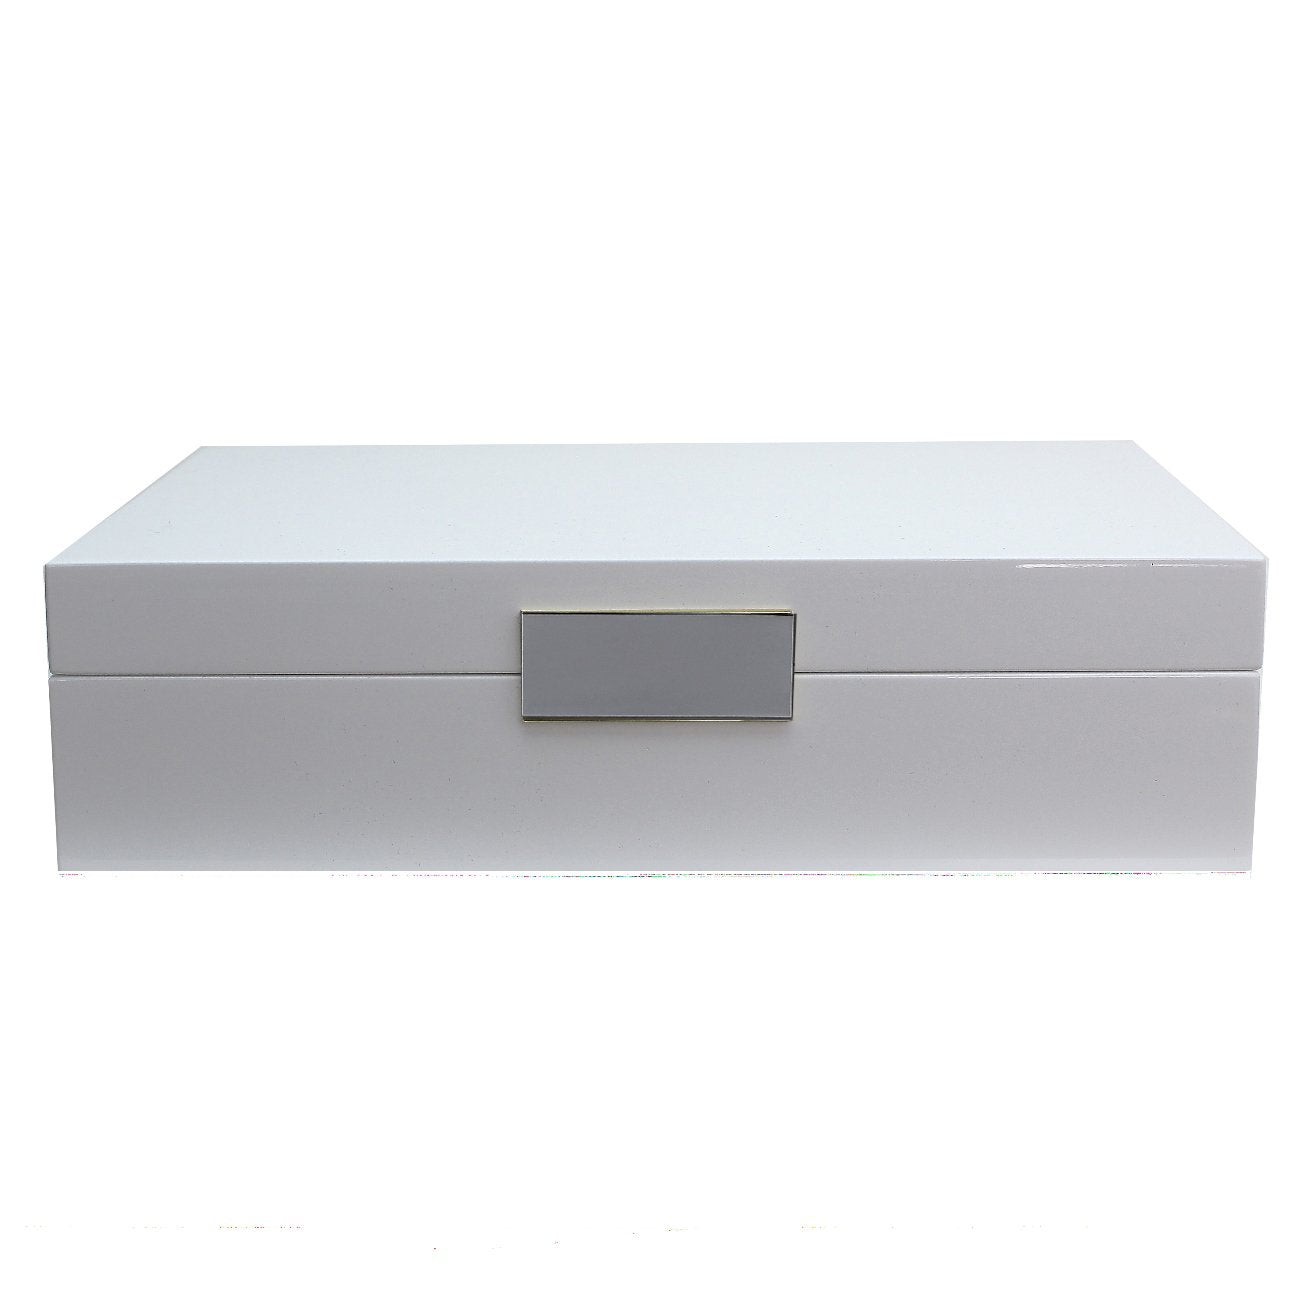 Large white glasses box with silver plated clasp